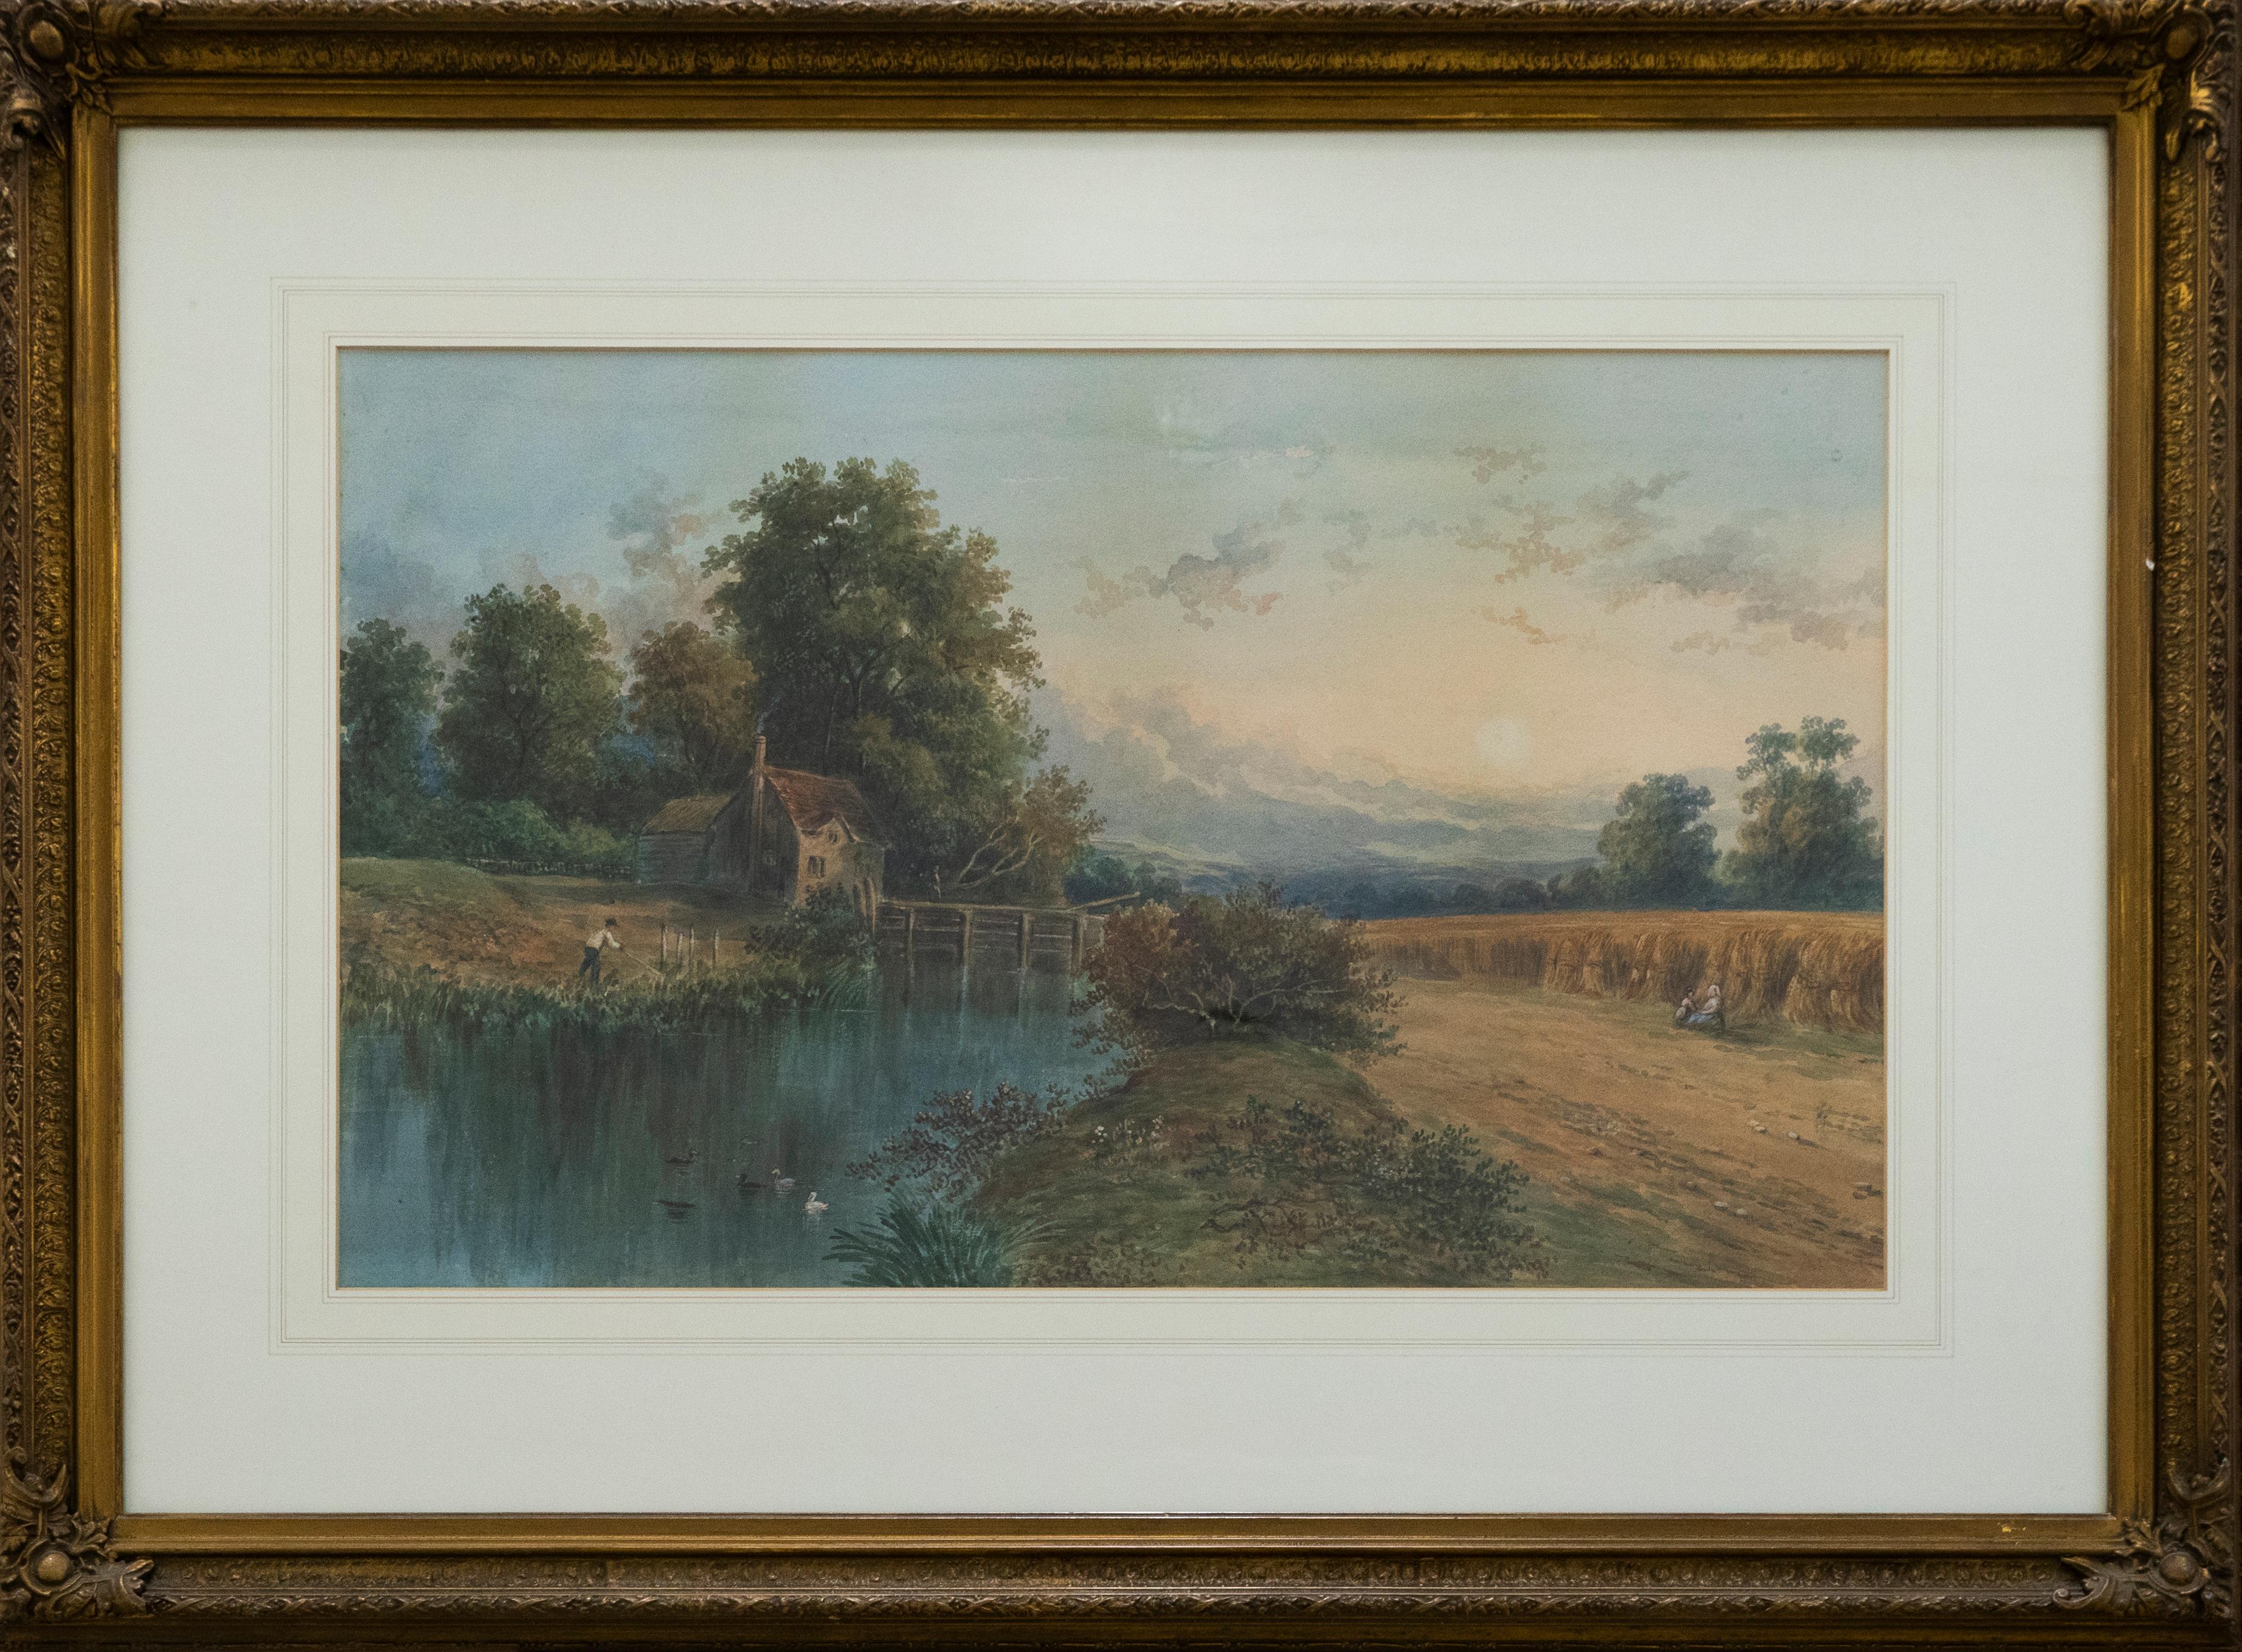 This scene sets place on the land of a small farm in late summer. In the foreground an angler casts his line into the river running between the small farm house and the wheat field. A mother and child sit on the field's verge watching the angler